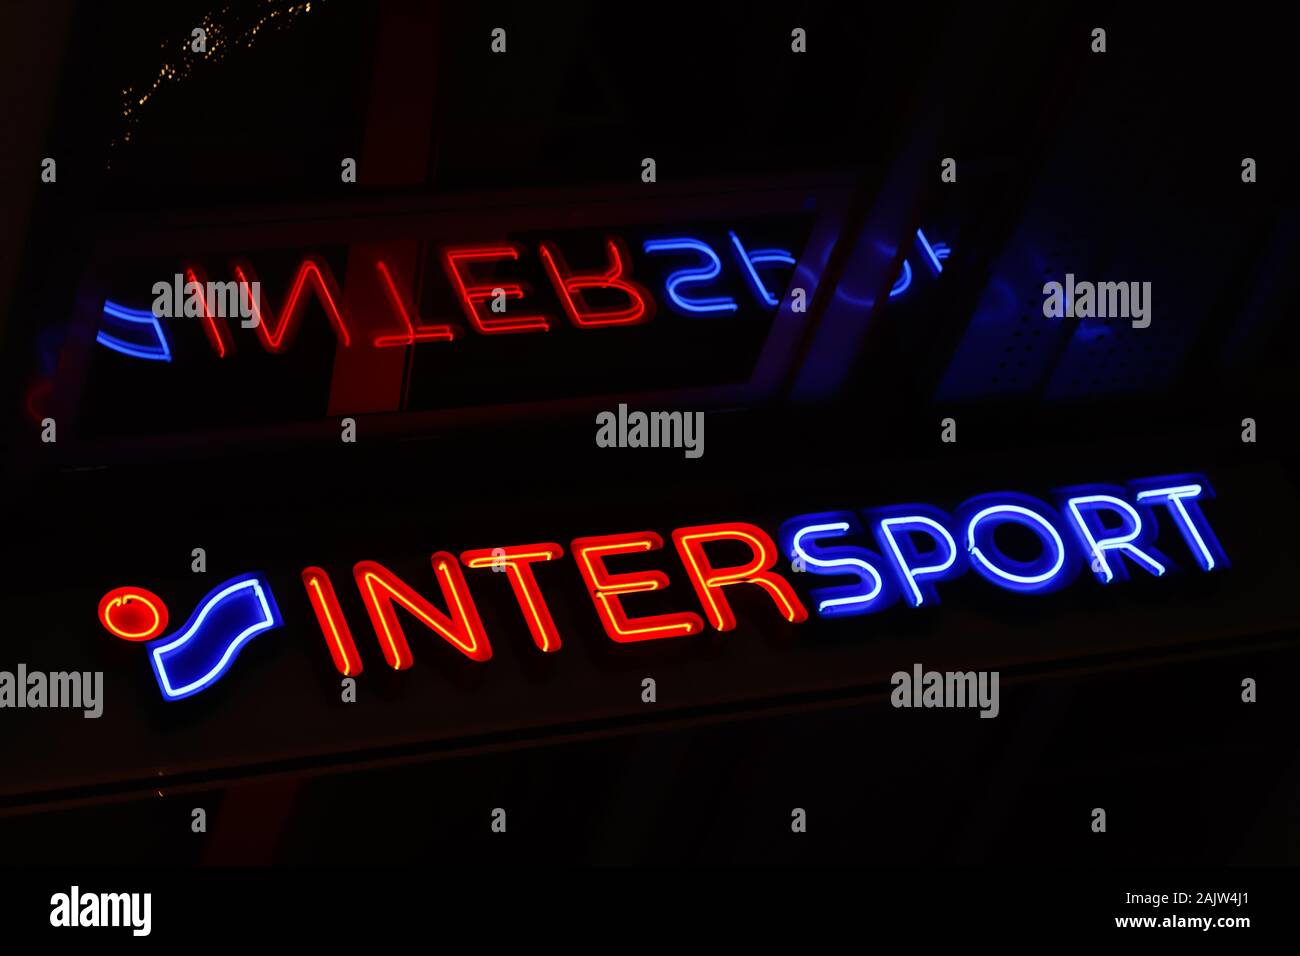 Stockholm, Sweden - January 3, 2020: Close-up view of the sports retail chain Intersport sign outside the Drottninggatan street store. Stock Photo